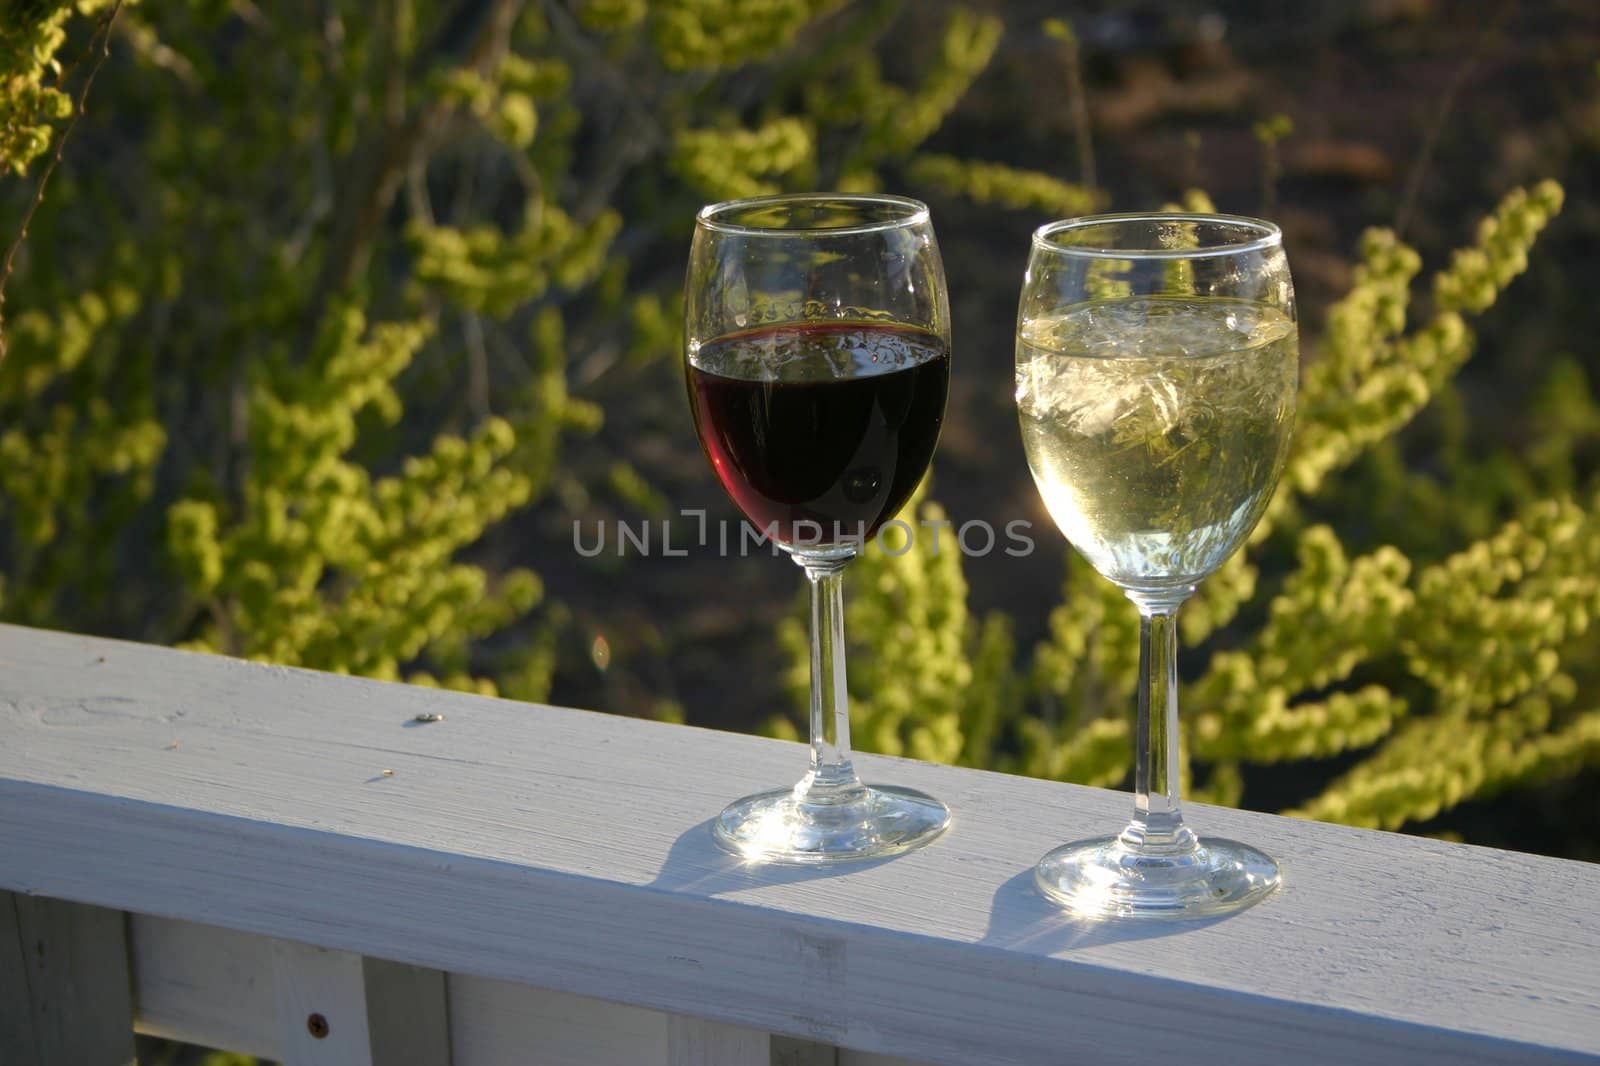 A glass of red wine and a glass of white wine sit on a porch railing ready to provide refreshment and relaxation after a stressful day.